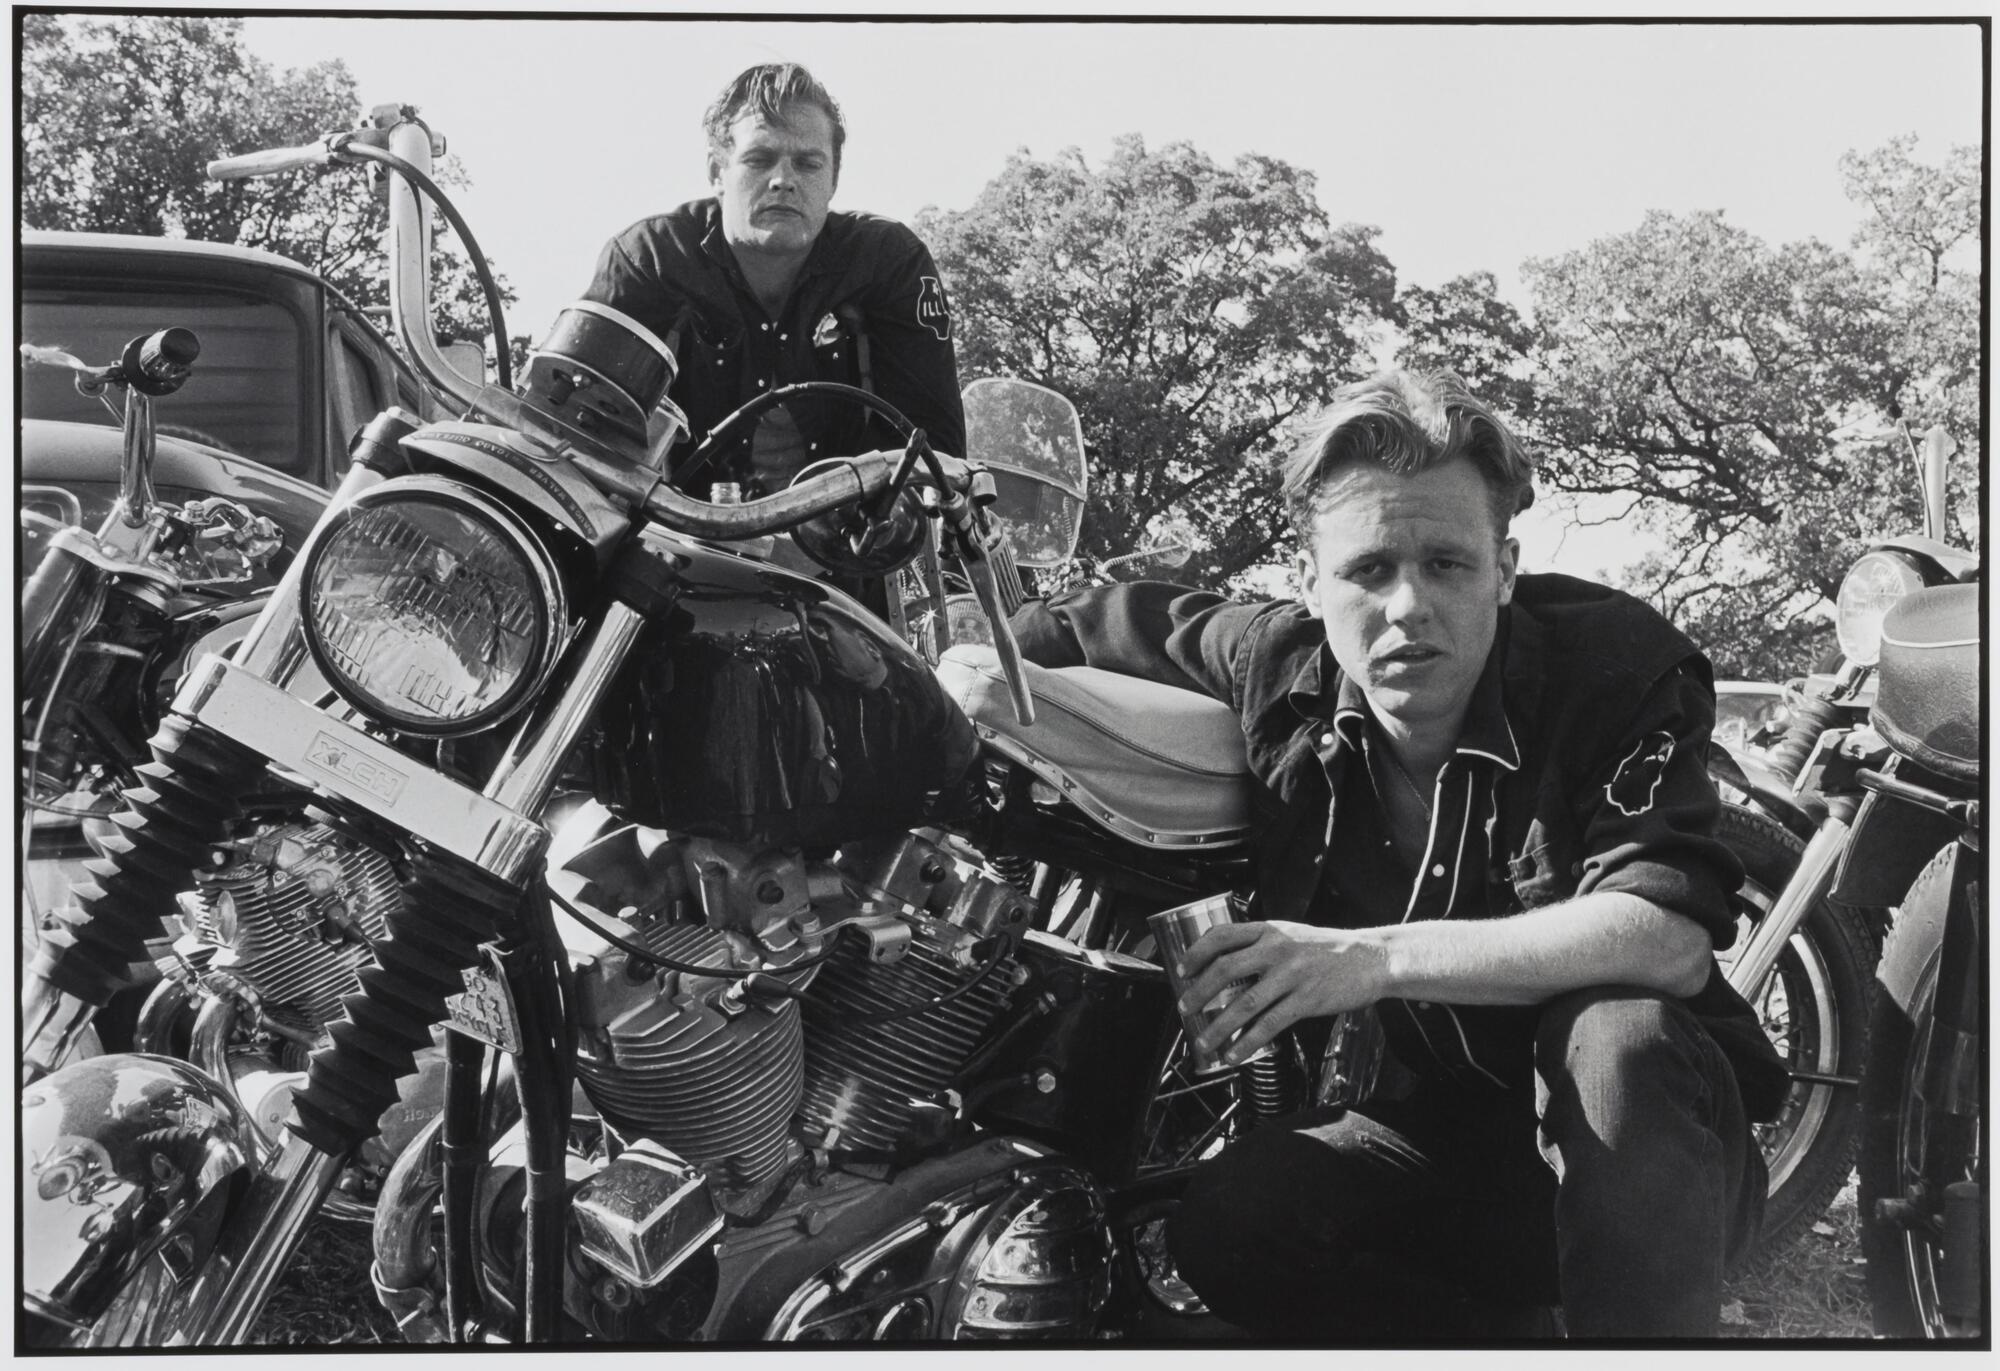 A photograph of two men with motorcycles. One man sits atop a motorcycle to the left. The second man crouches beside another bike, his right arm resting on the seat, a cup in his left hand. Both men look into the camera lens.